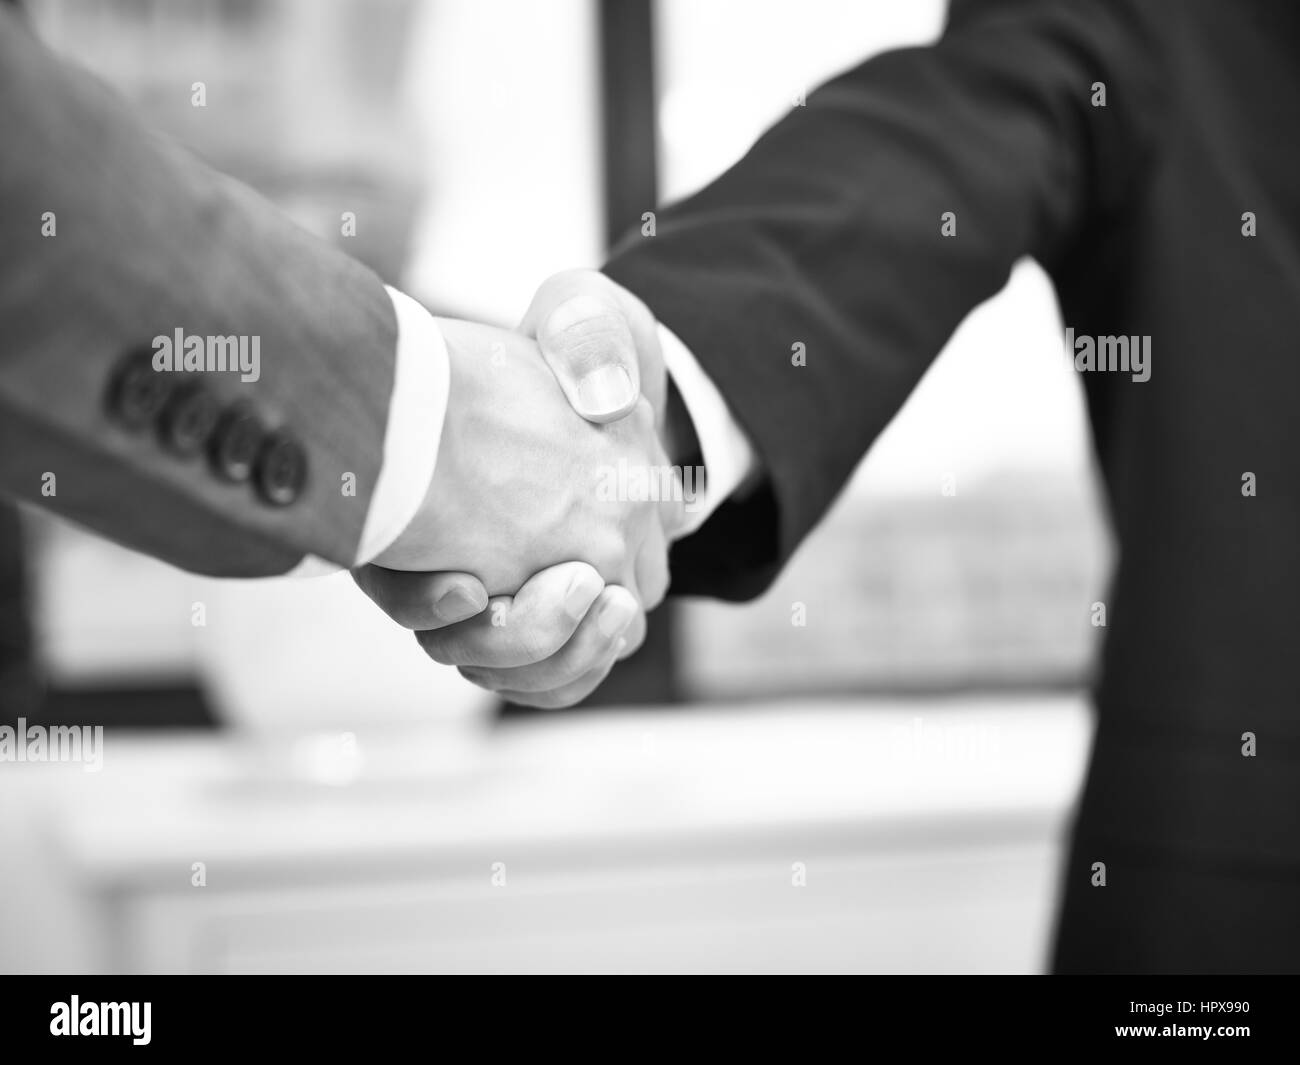 two corporate businessmen shaking hands in office, black and white. Stock Photo